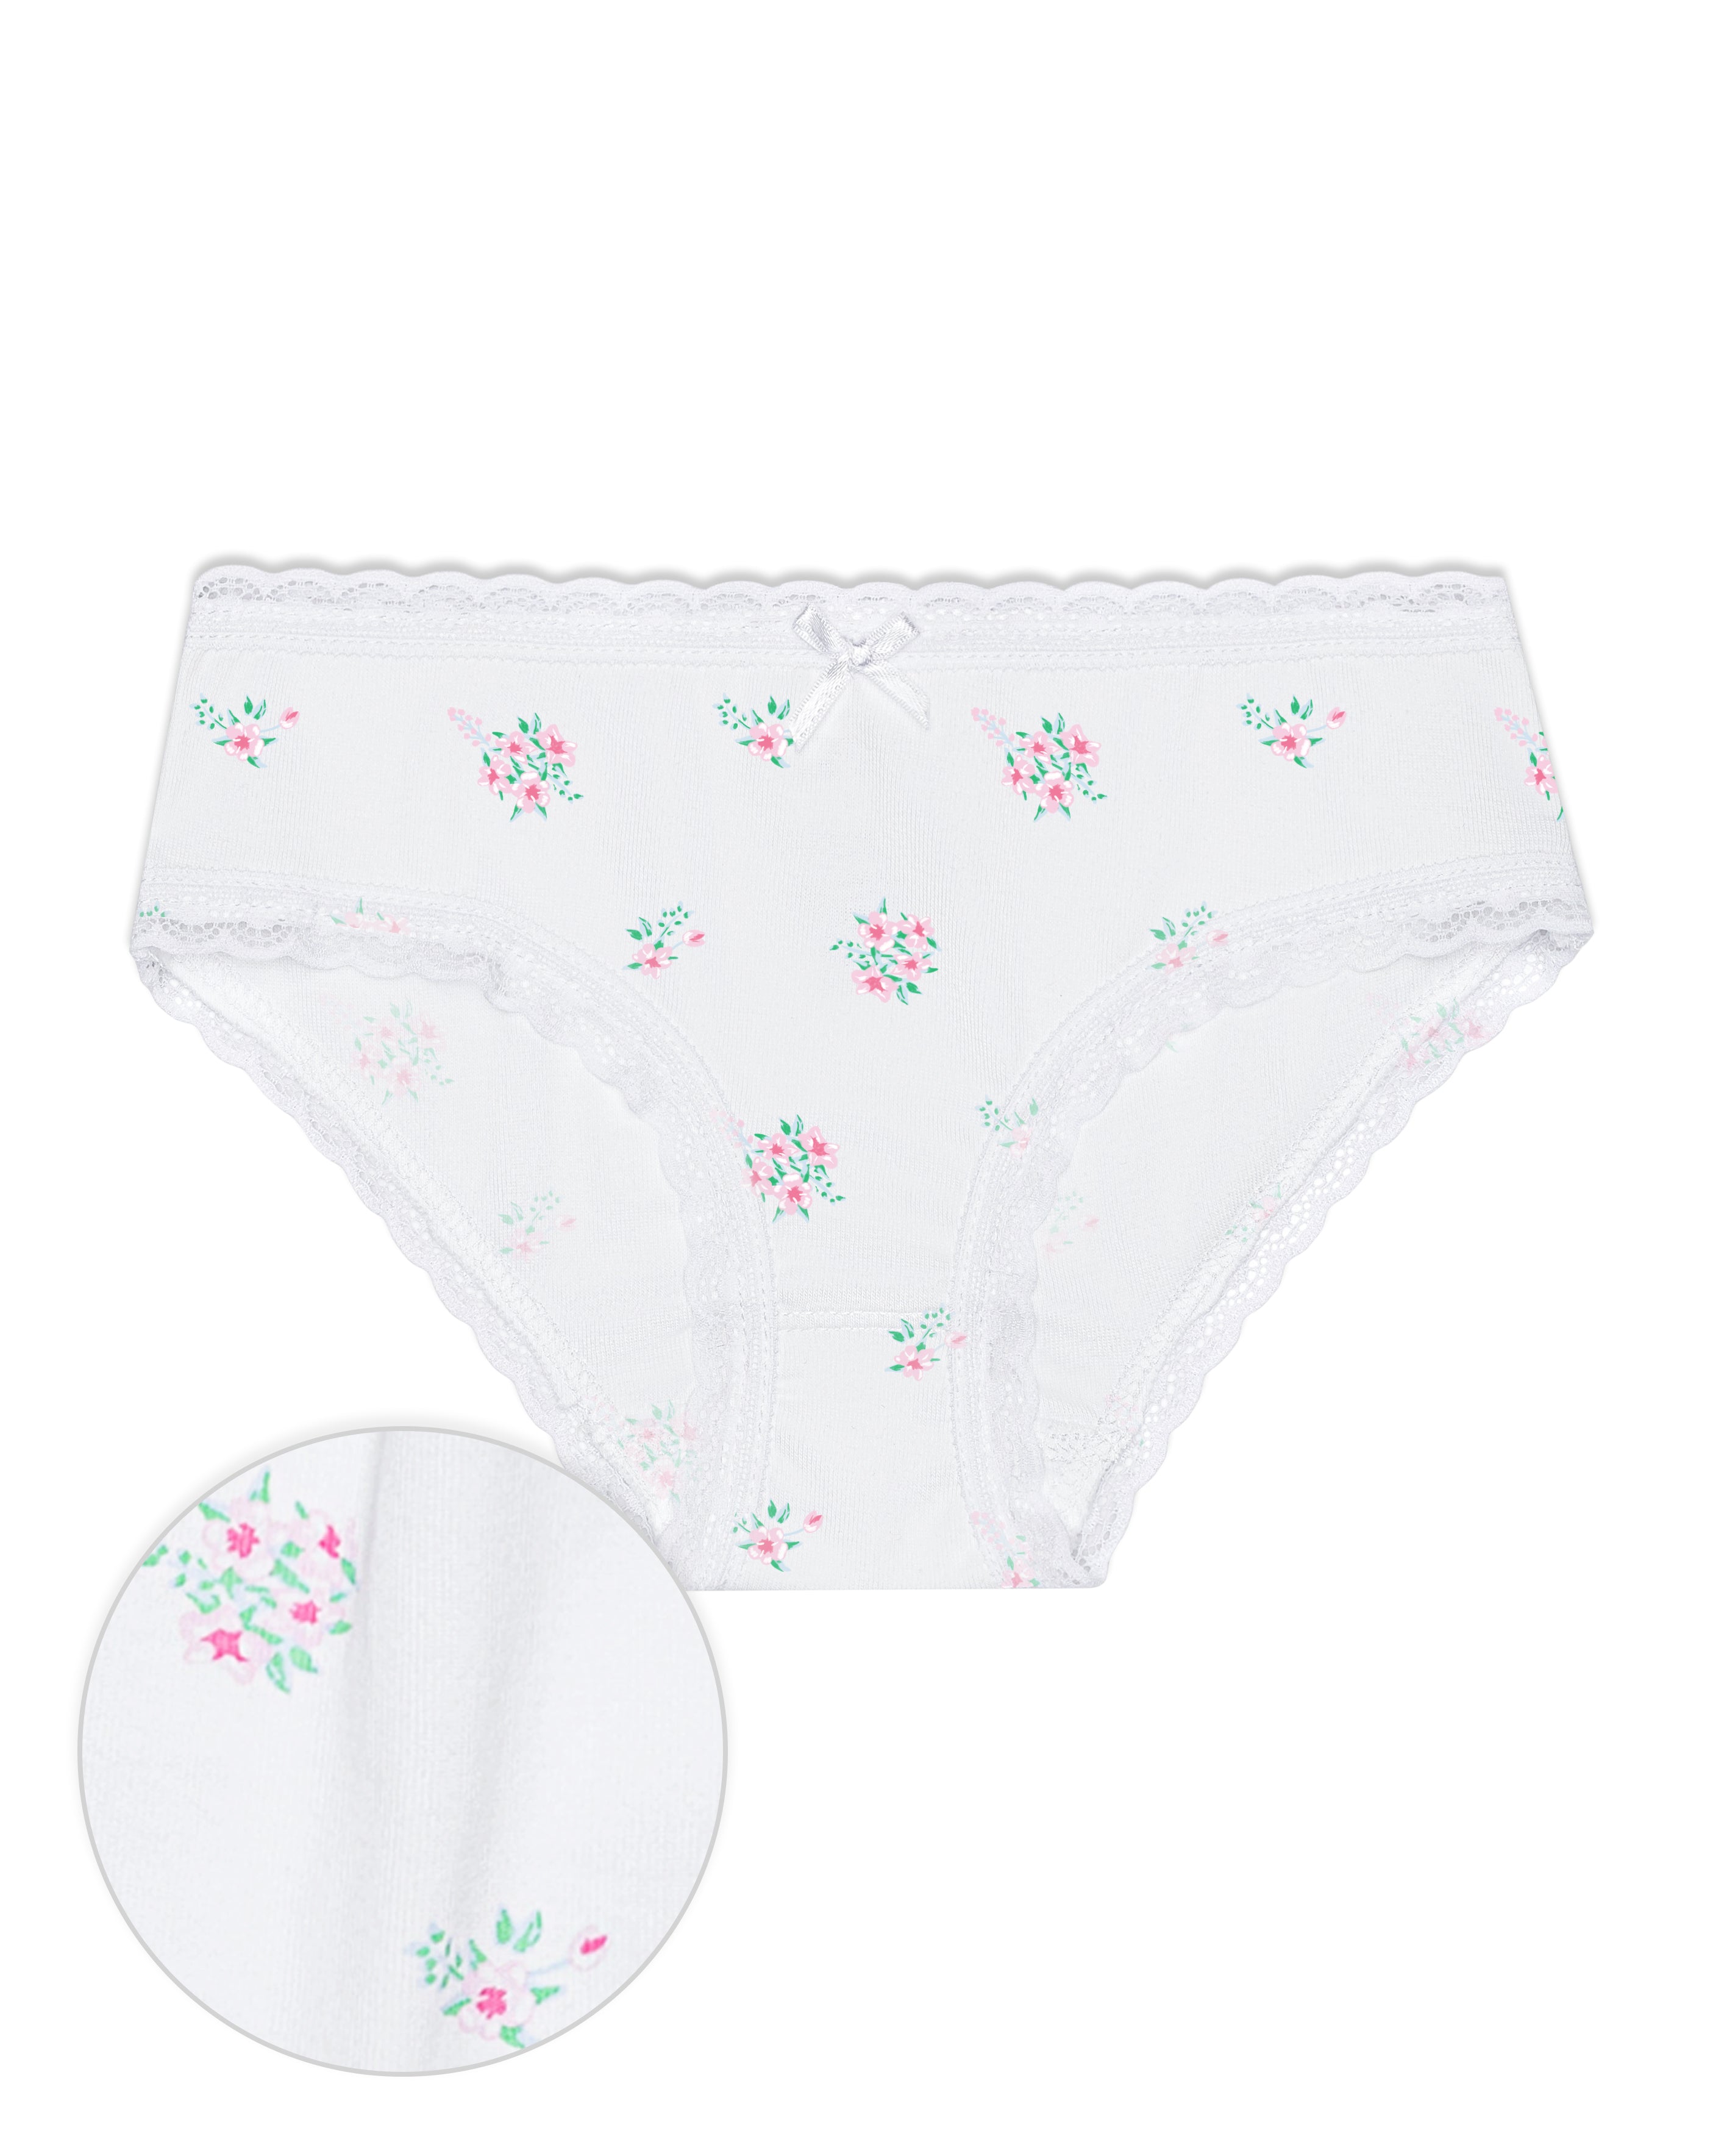 The Organic Underwear [Ditsy Floral]